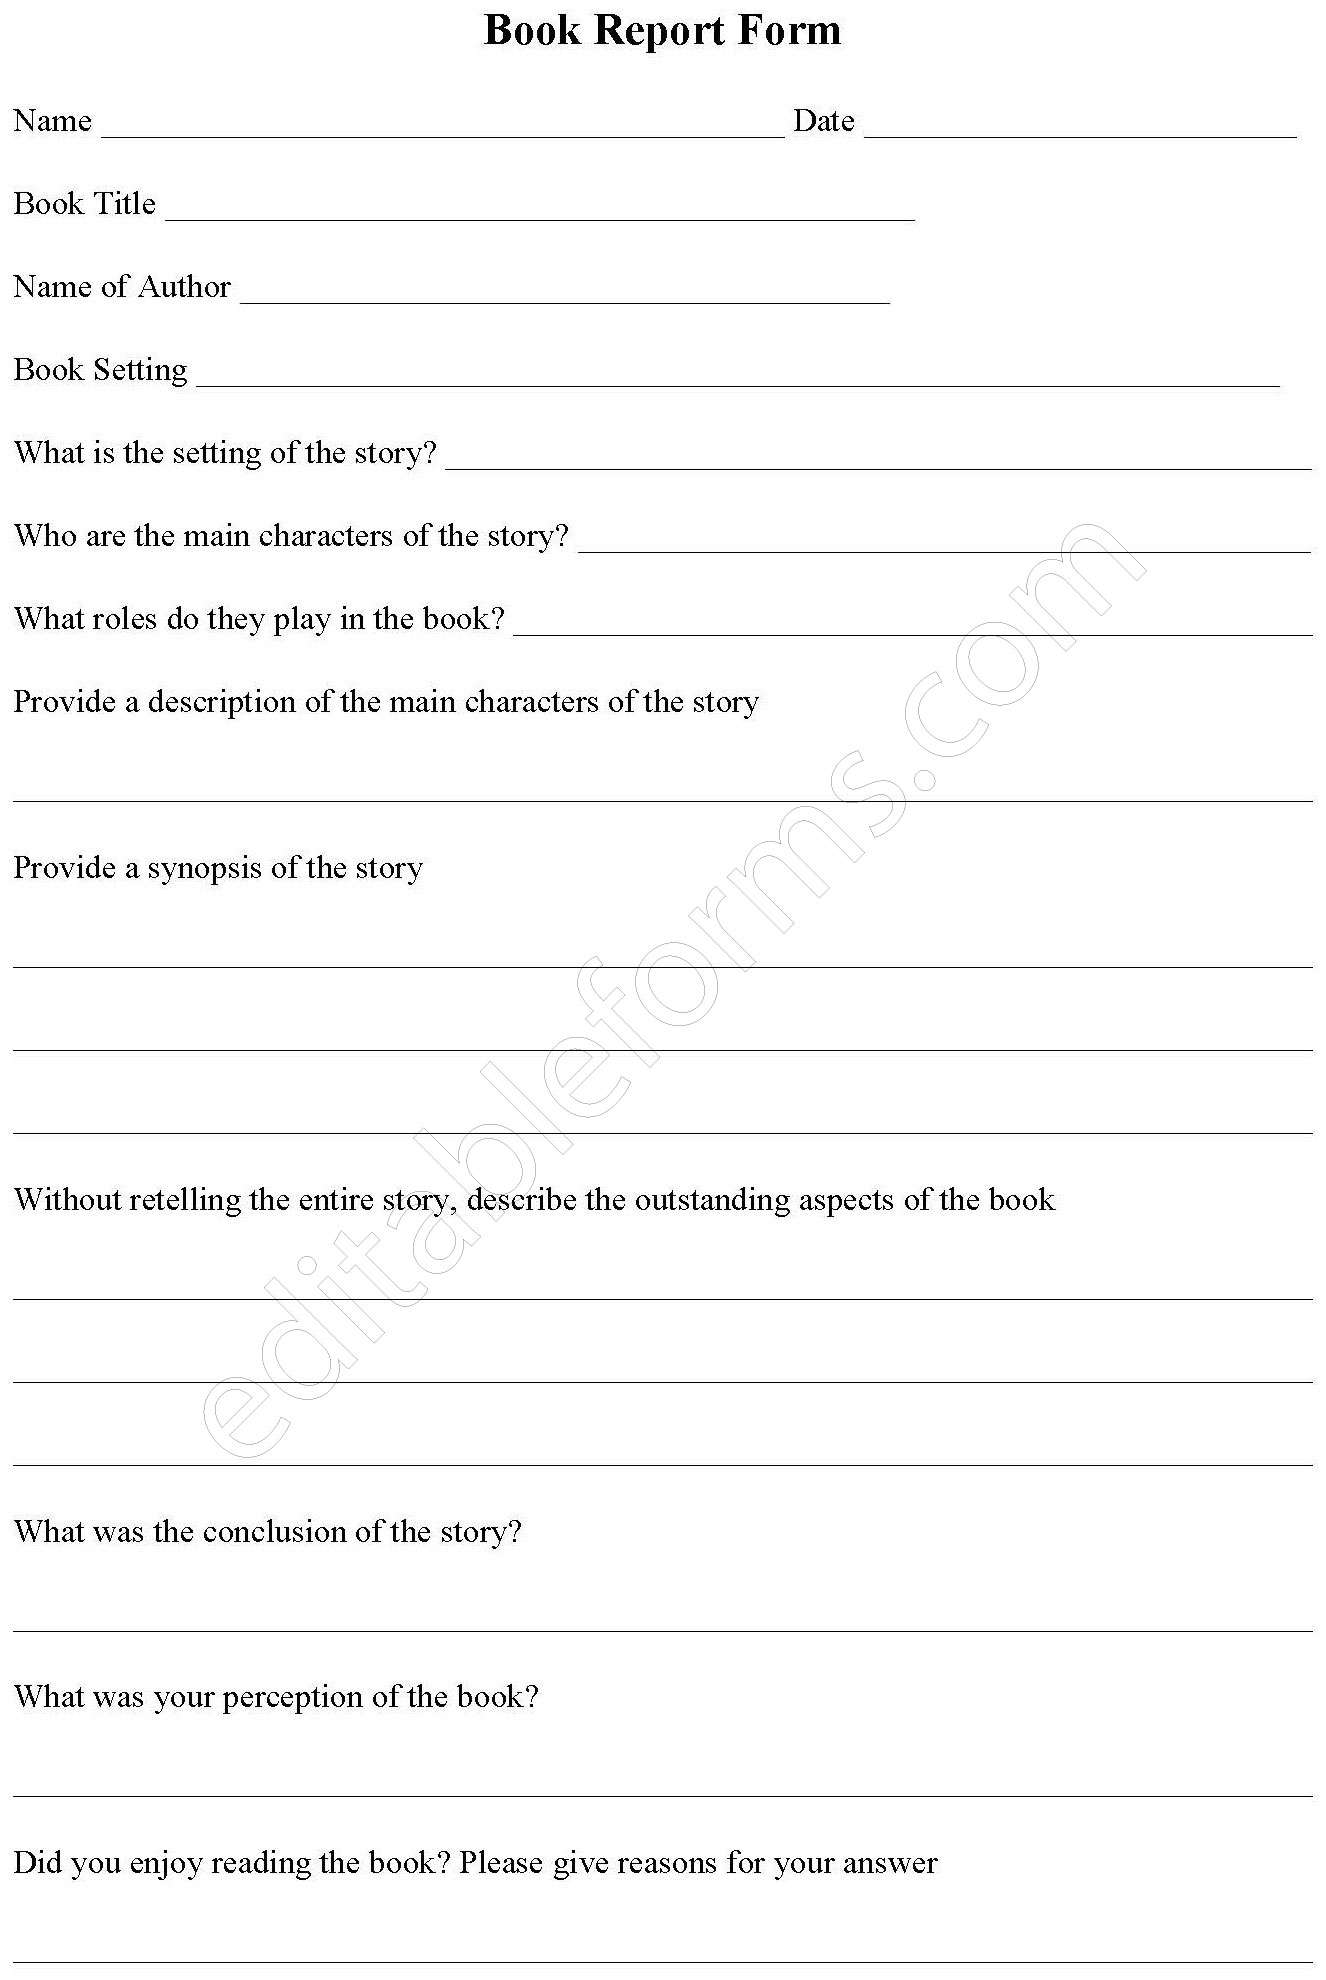 Printable Book Report Form